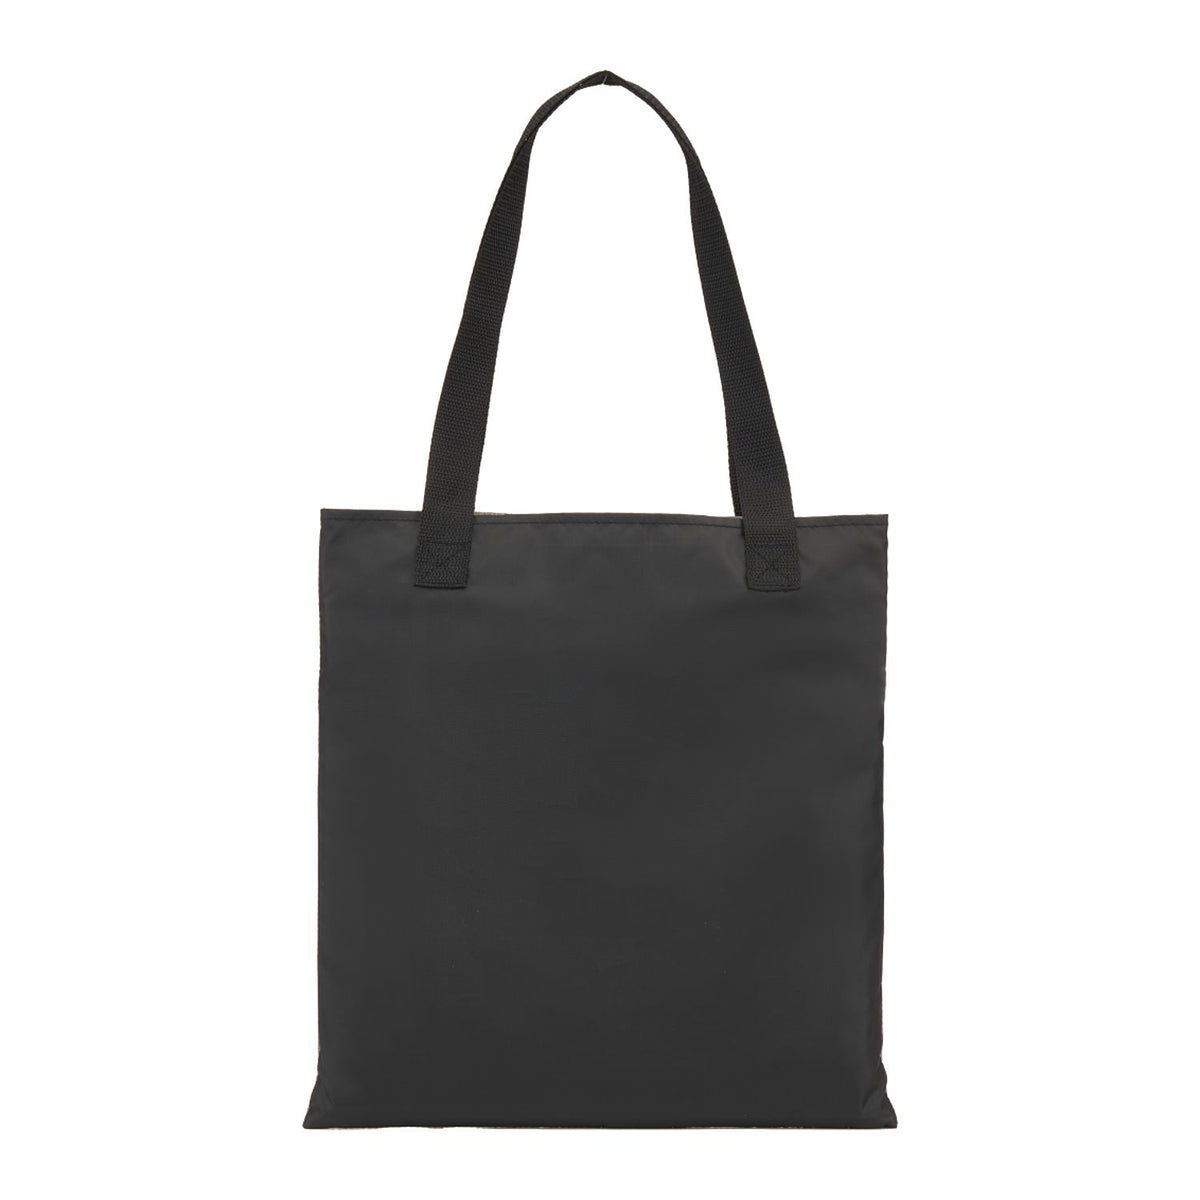 Swoop RPET Convention Tote